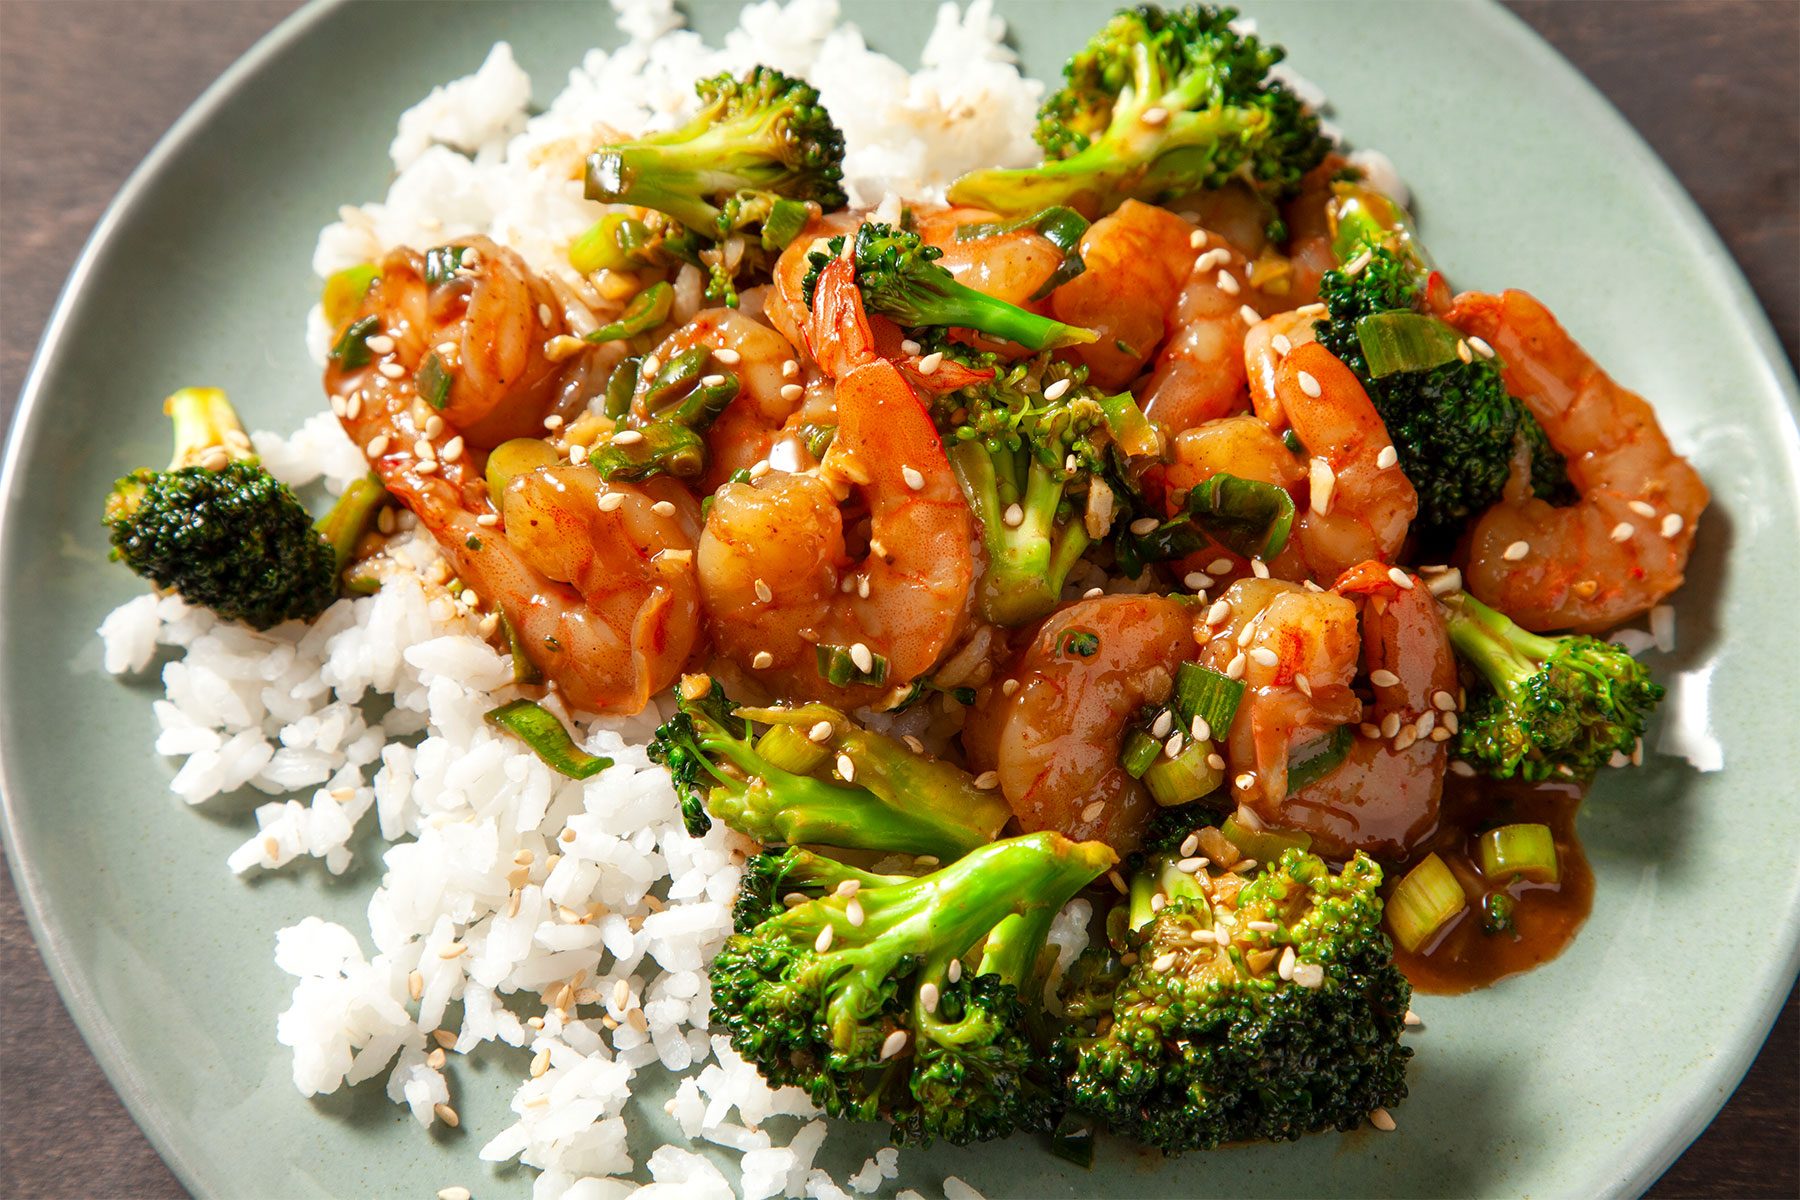 Shrimp And Broccoli Stir Fry served with rice on plate